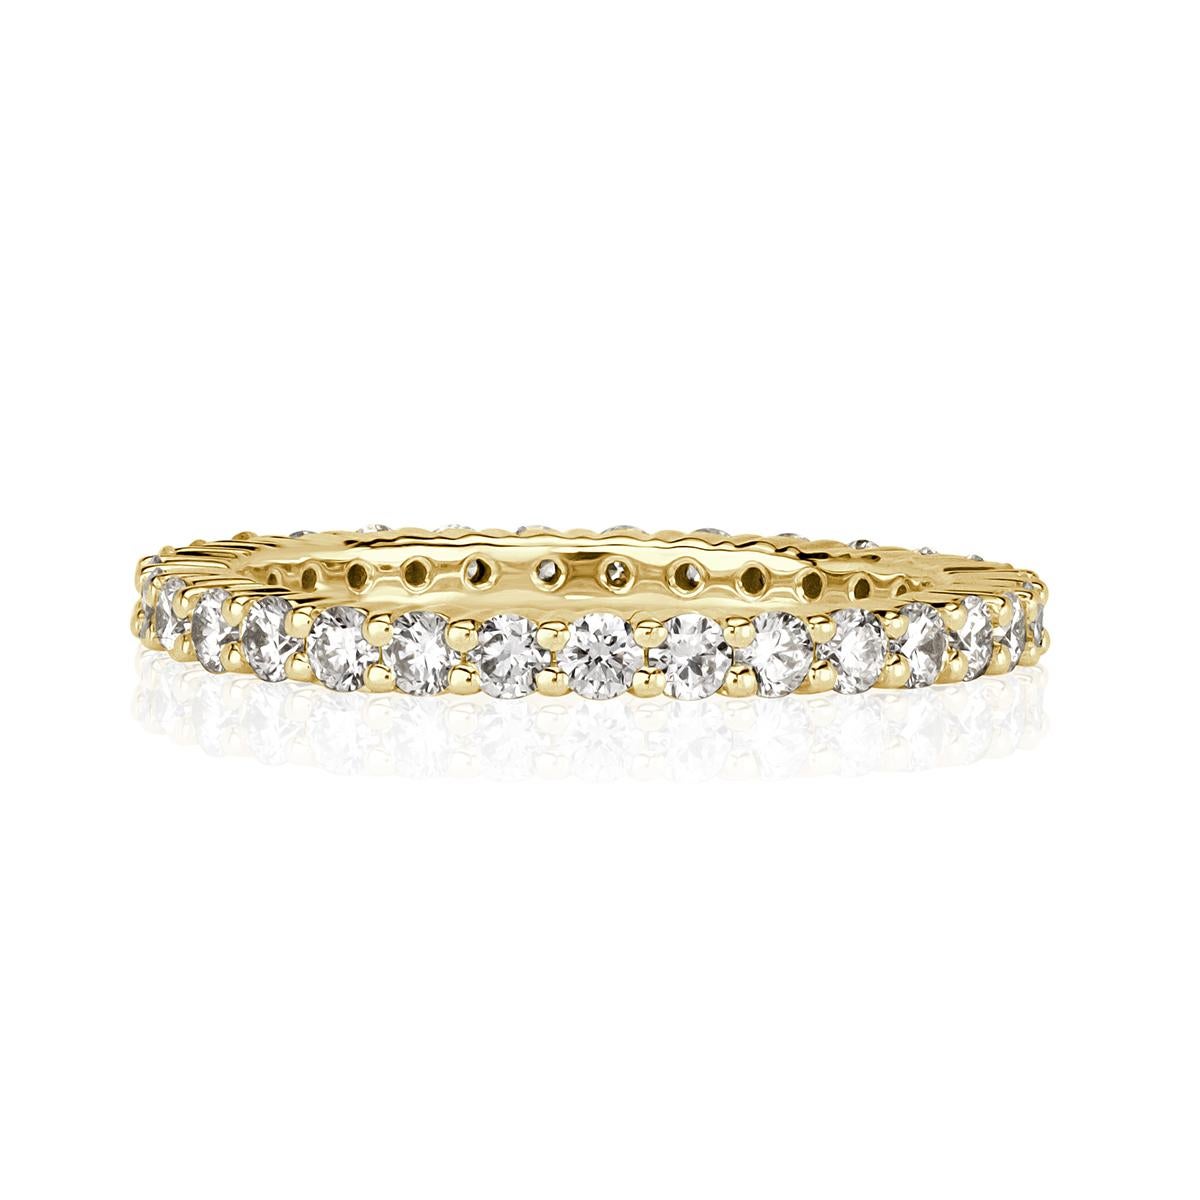 Women's or Men's Mark Broumand 1.00 Carat Round Brilliant Cut Diamond Eternity Band in 18k Yellow For Sale